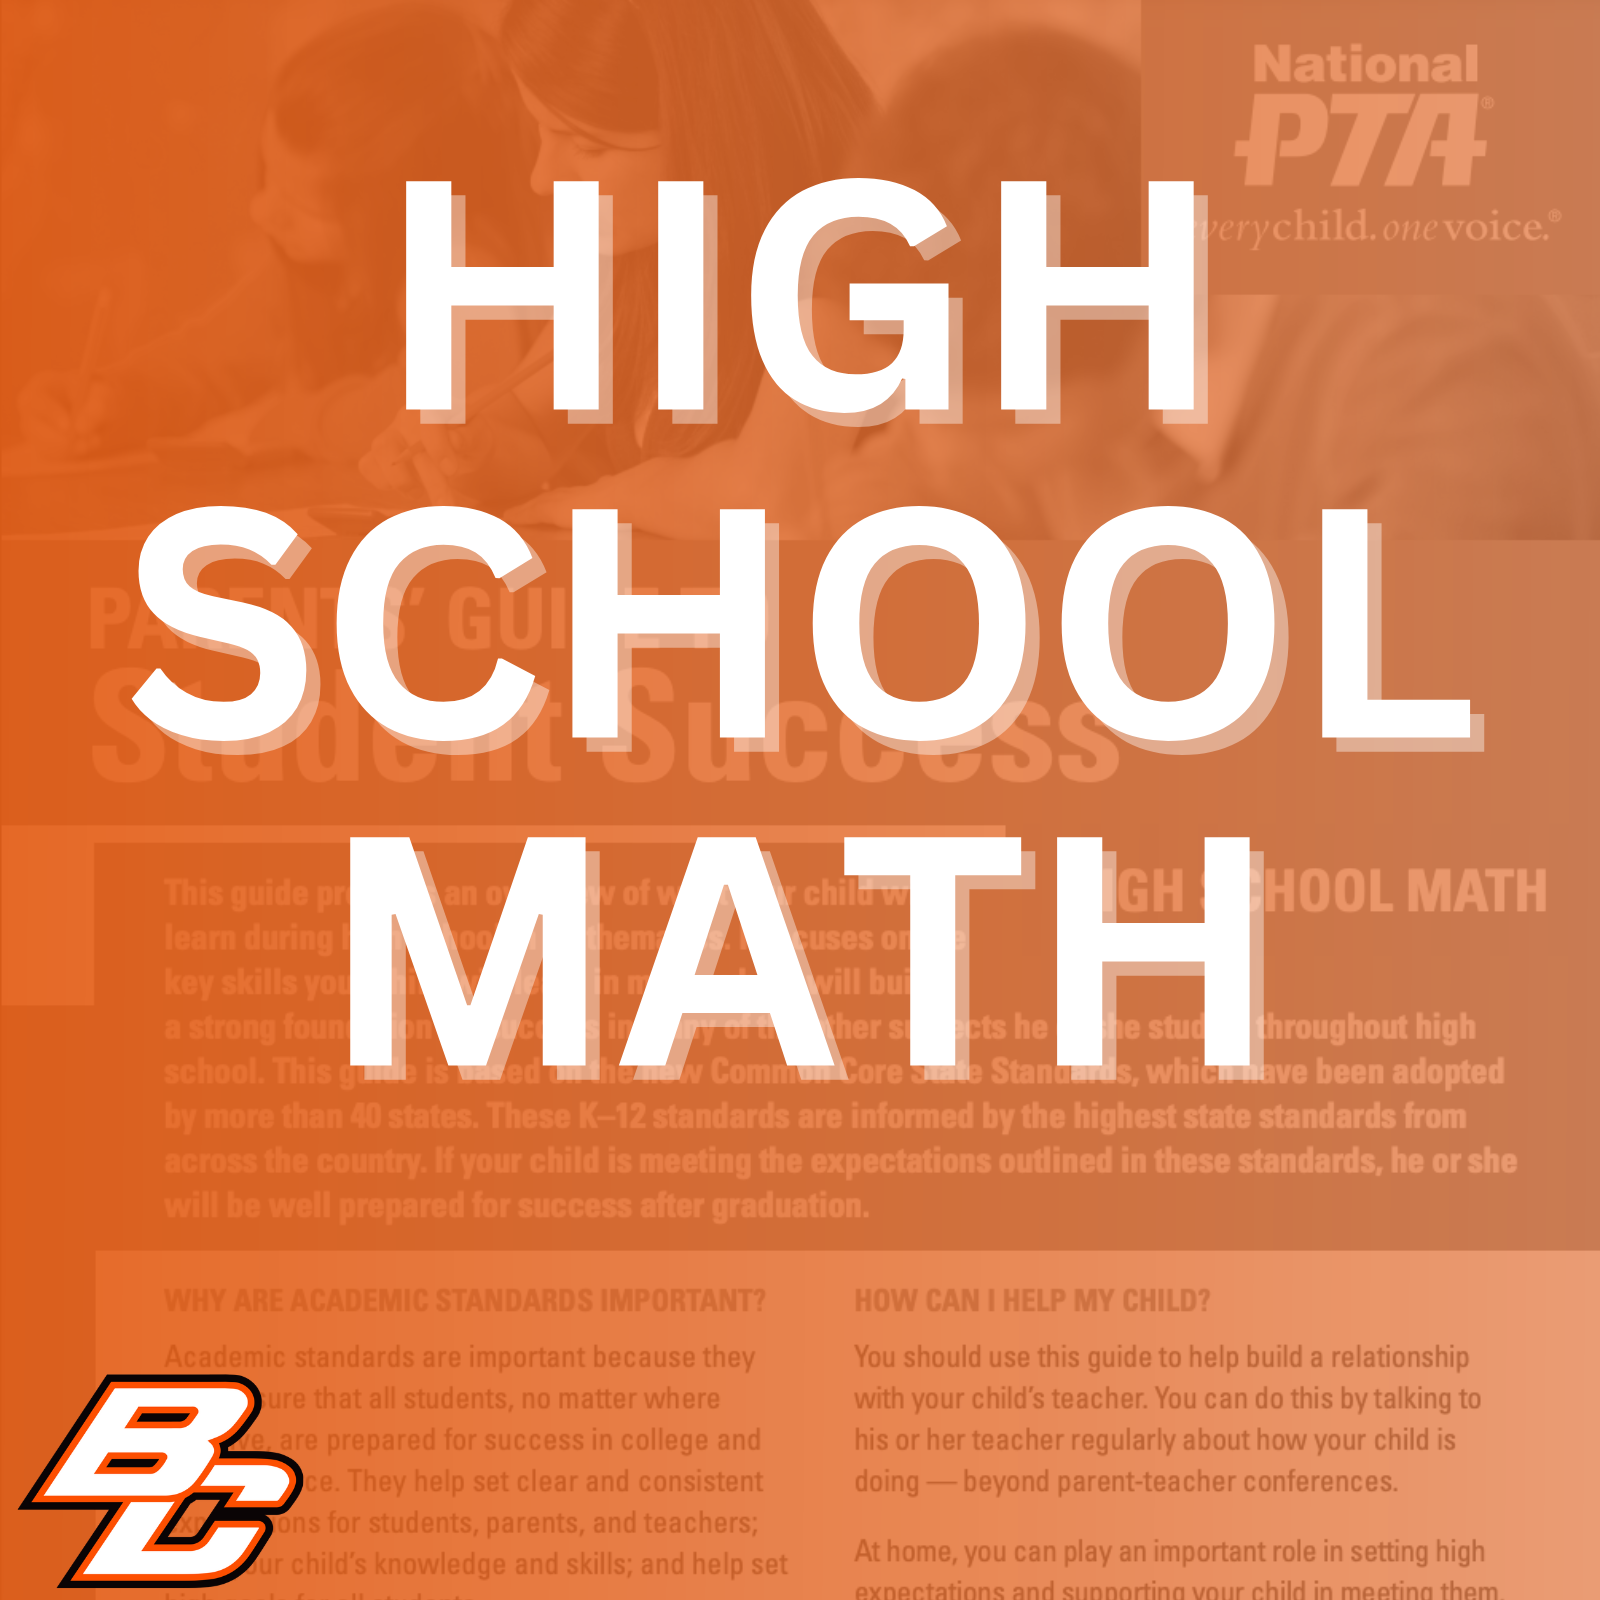 Parent’s Guide to Student Success for High School Math: This guide provides an overview of what your child will learn during high school in mathematics. It focuses on the key skills your child will learn in math, which will build a strong foundation for success in many of the other subjects he or she studies throughout high school. This guide is based on the new Common Core State Standards, which have been adopted by more than 40 states. These K-12 standards are informed by the highest state standards from across the country. If your child is meeting the expectations outlined in these standards, he or she will be well prepared for success after graduation.  Why are academic standards important? Academic standards are important because they help ensure that all students, no matter where they live, are prepared for success in college and the workforce. They help set clear and consistent expectations for students, parents, and teachers; build your child's knowledge and skills; and help set high goals for all students.  Of course, high standards are not the only thing more about a subject, work with his or her teacher to needed for our children's success. But standards identify opportunities for tutoring, to get involved in provide an important first step - a clear roadmap for clubs after school, or to find other resources. learning for teachers, parents, and students. Having clearly defined goals helps families and teachers work together to ensure that students succeed. Standards help parents and teachers know when students need extra assistance or when they need to be challenged even more. They also will help your child develop critical thinking skills that will prepare him or her for college and career.  How can I help my child? You should use this guide to help build a relationship with your child's teacher. You can do this by talking to his or her teacher regularly about how your child is doing - beyond parent-teacher conferences.  At home, you can play an important role in setting high expectations and supporting your child in meeting them. If your child needs a little extra help or wants to learn more about a subject, work with his or her teacher to identify opportunities for tutoring, to get involved in clubs after school, or to find other resources.  This guide includes: An overview of some of the key things your child will learn in math in high school, topics of discussion for talking to your child's teacher about his or her academic progress and tips to help your child plan for college and career.